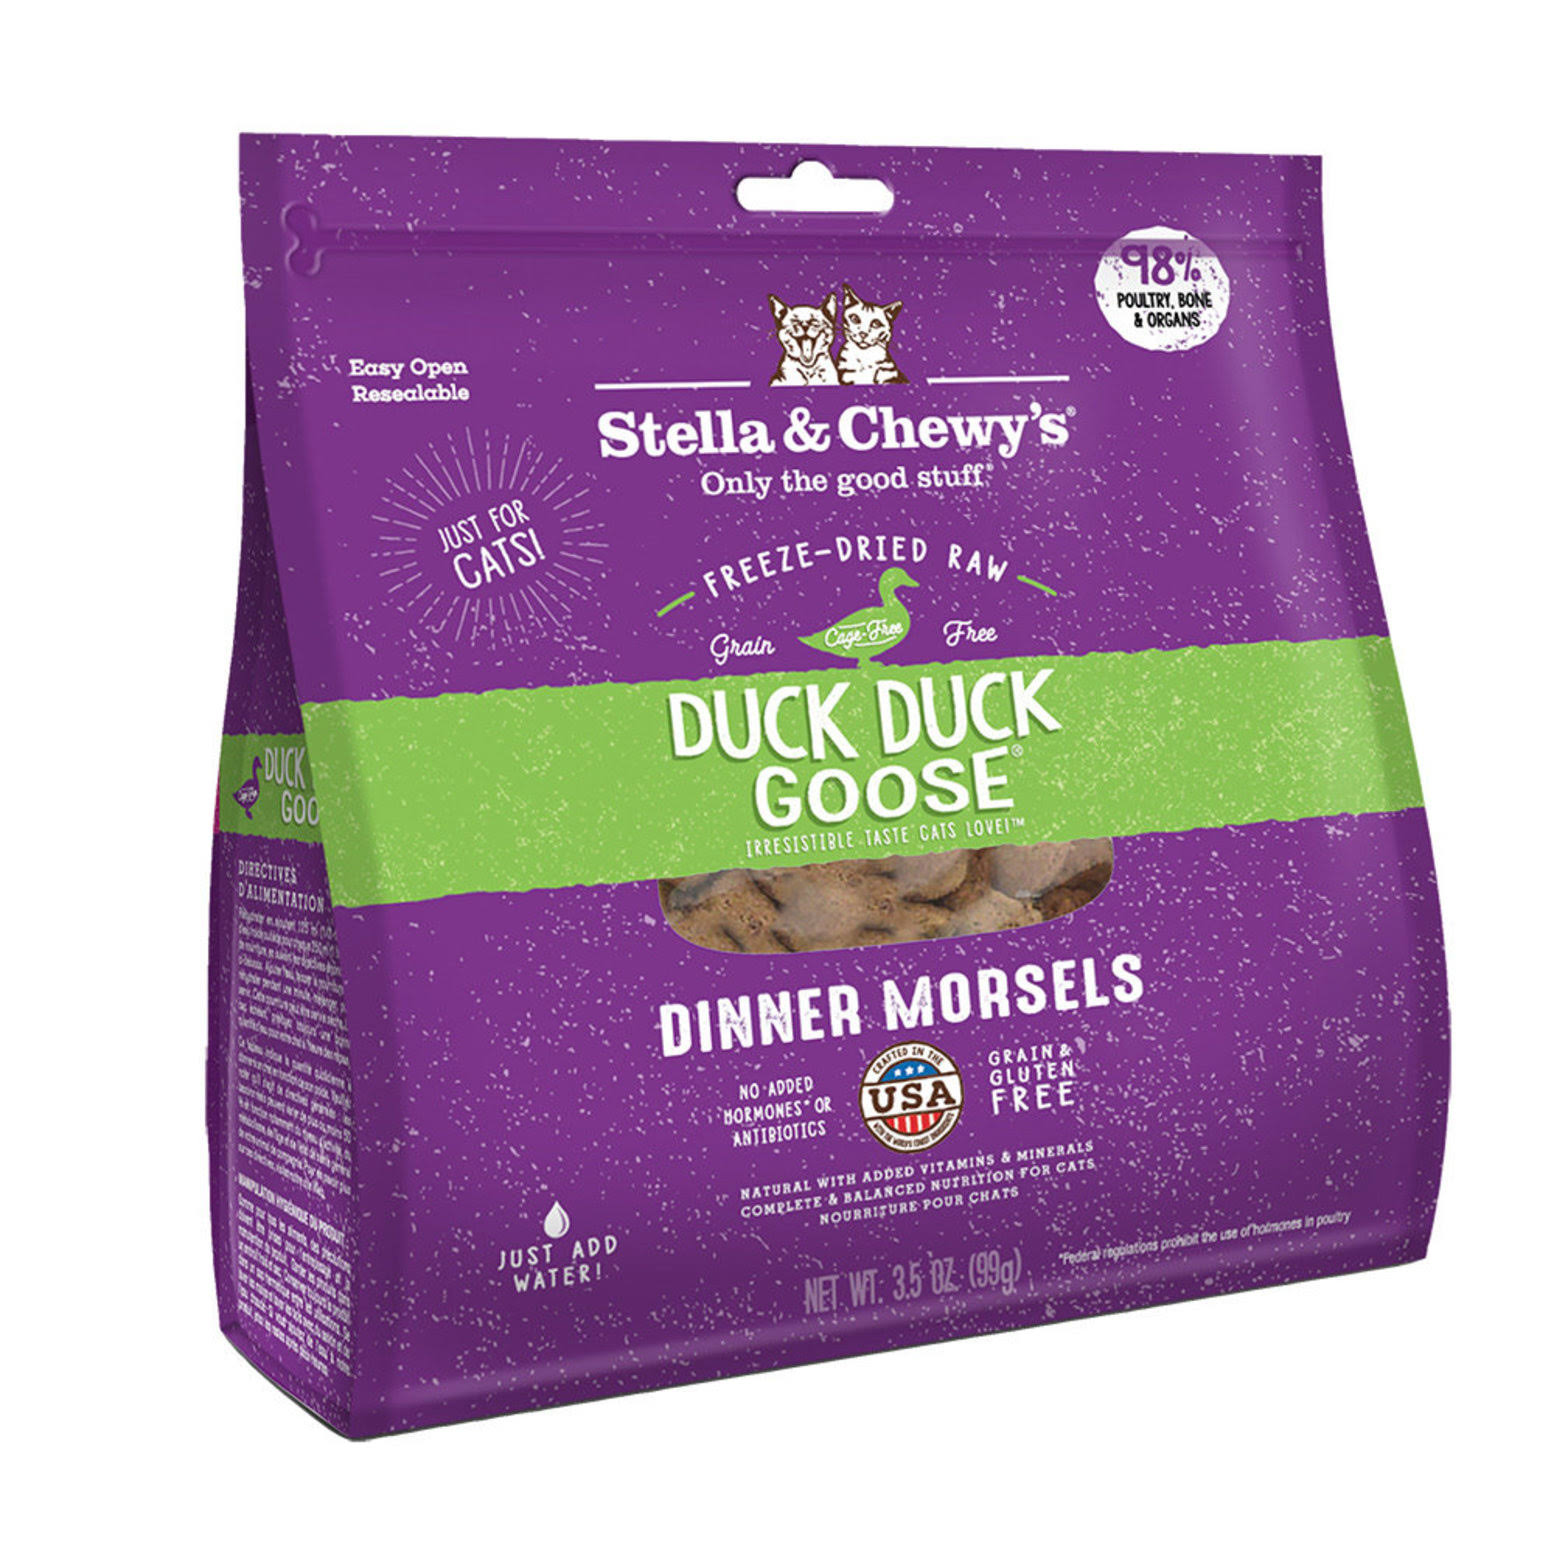 Stella & Chewy's Duck Duck Goose Dinner Morsels - 99g